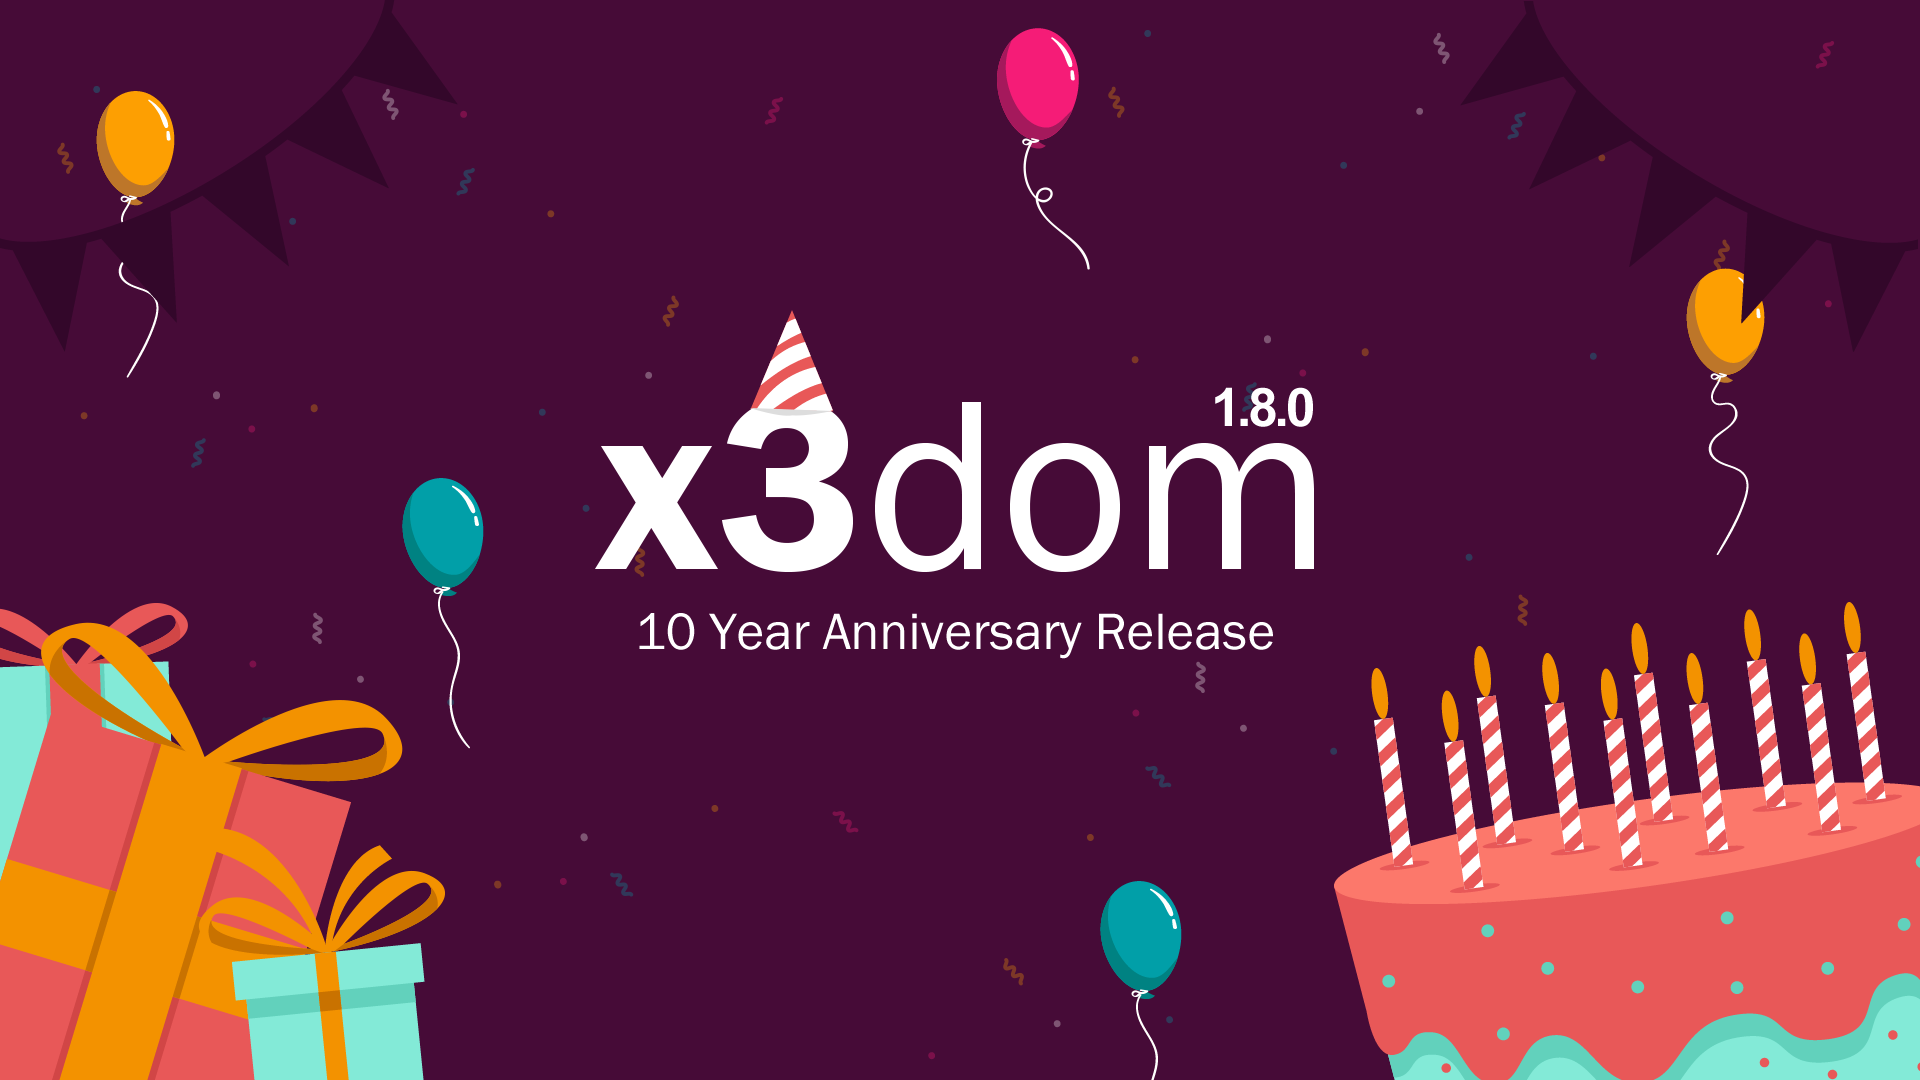 x3dom - 10 Year Anniversary Release